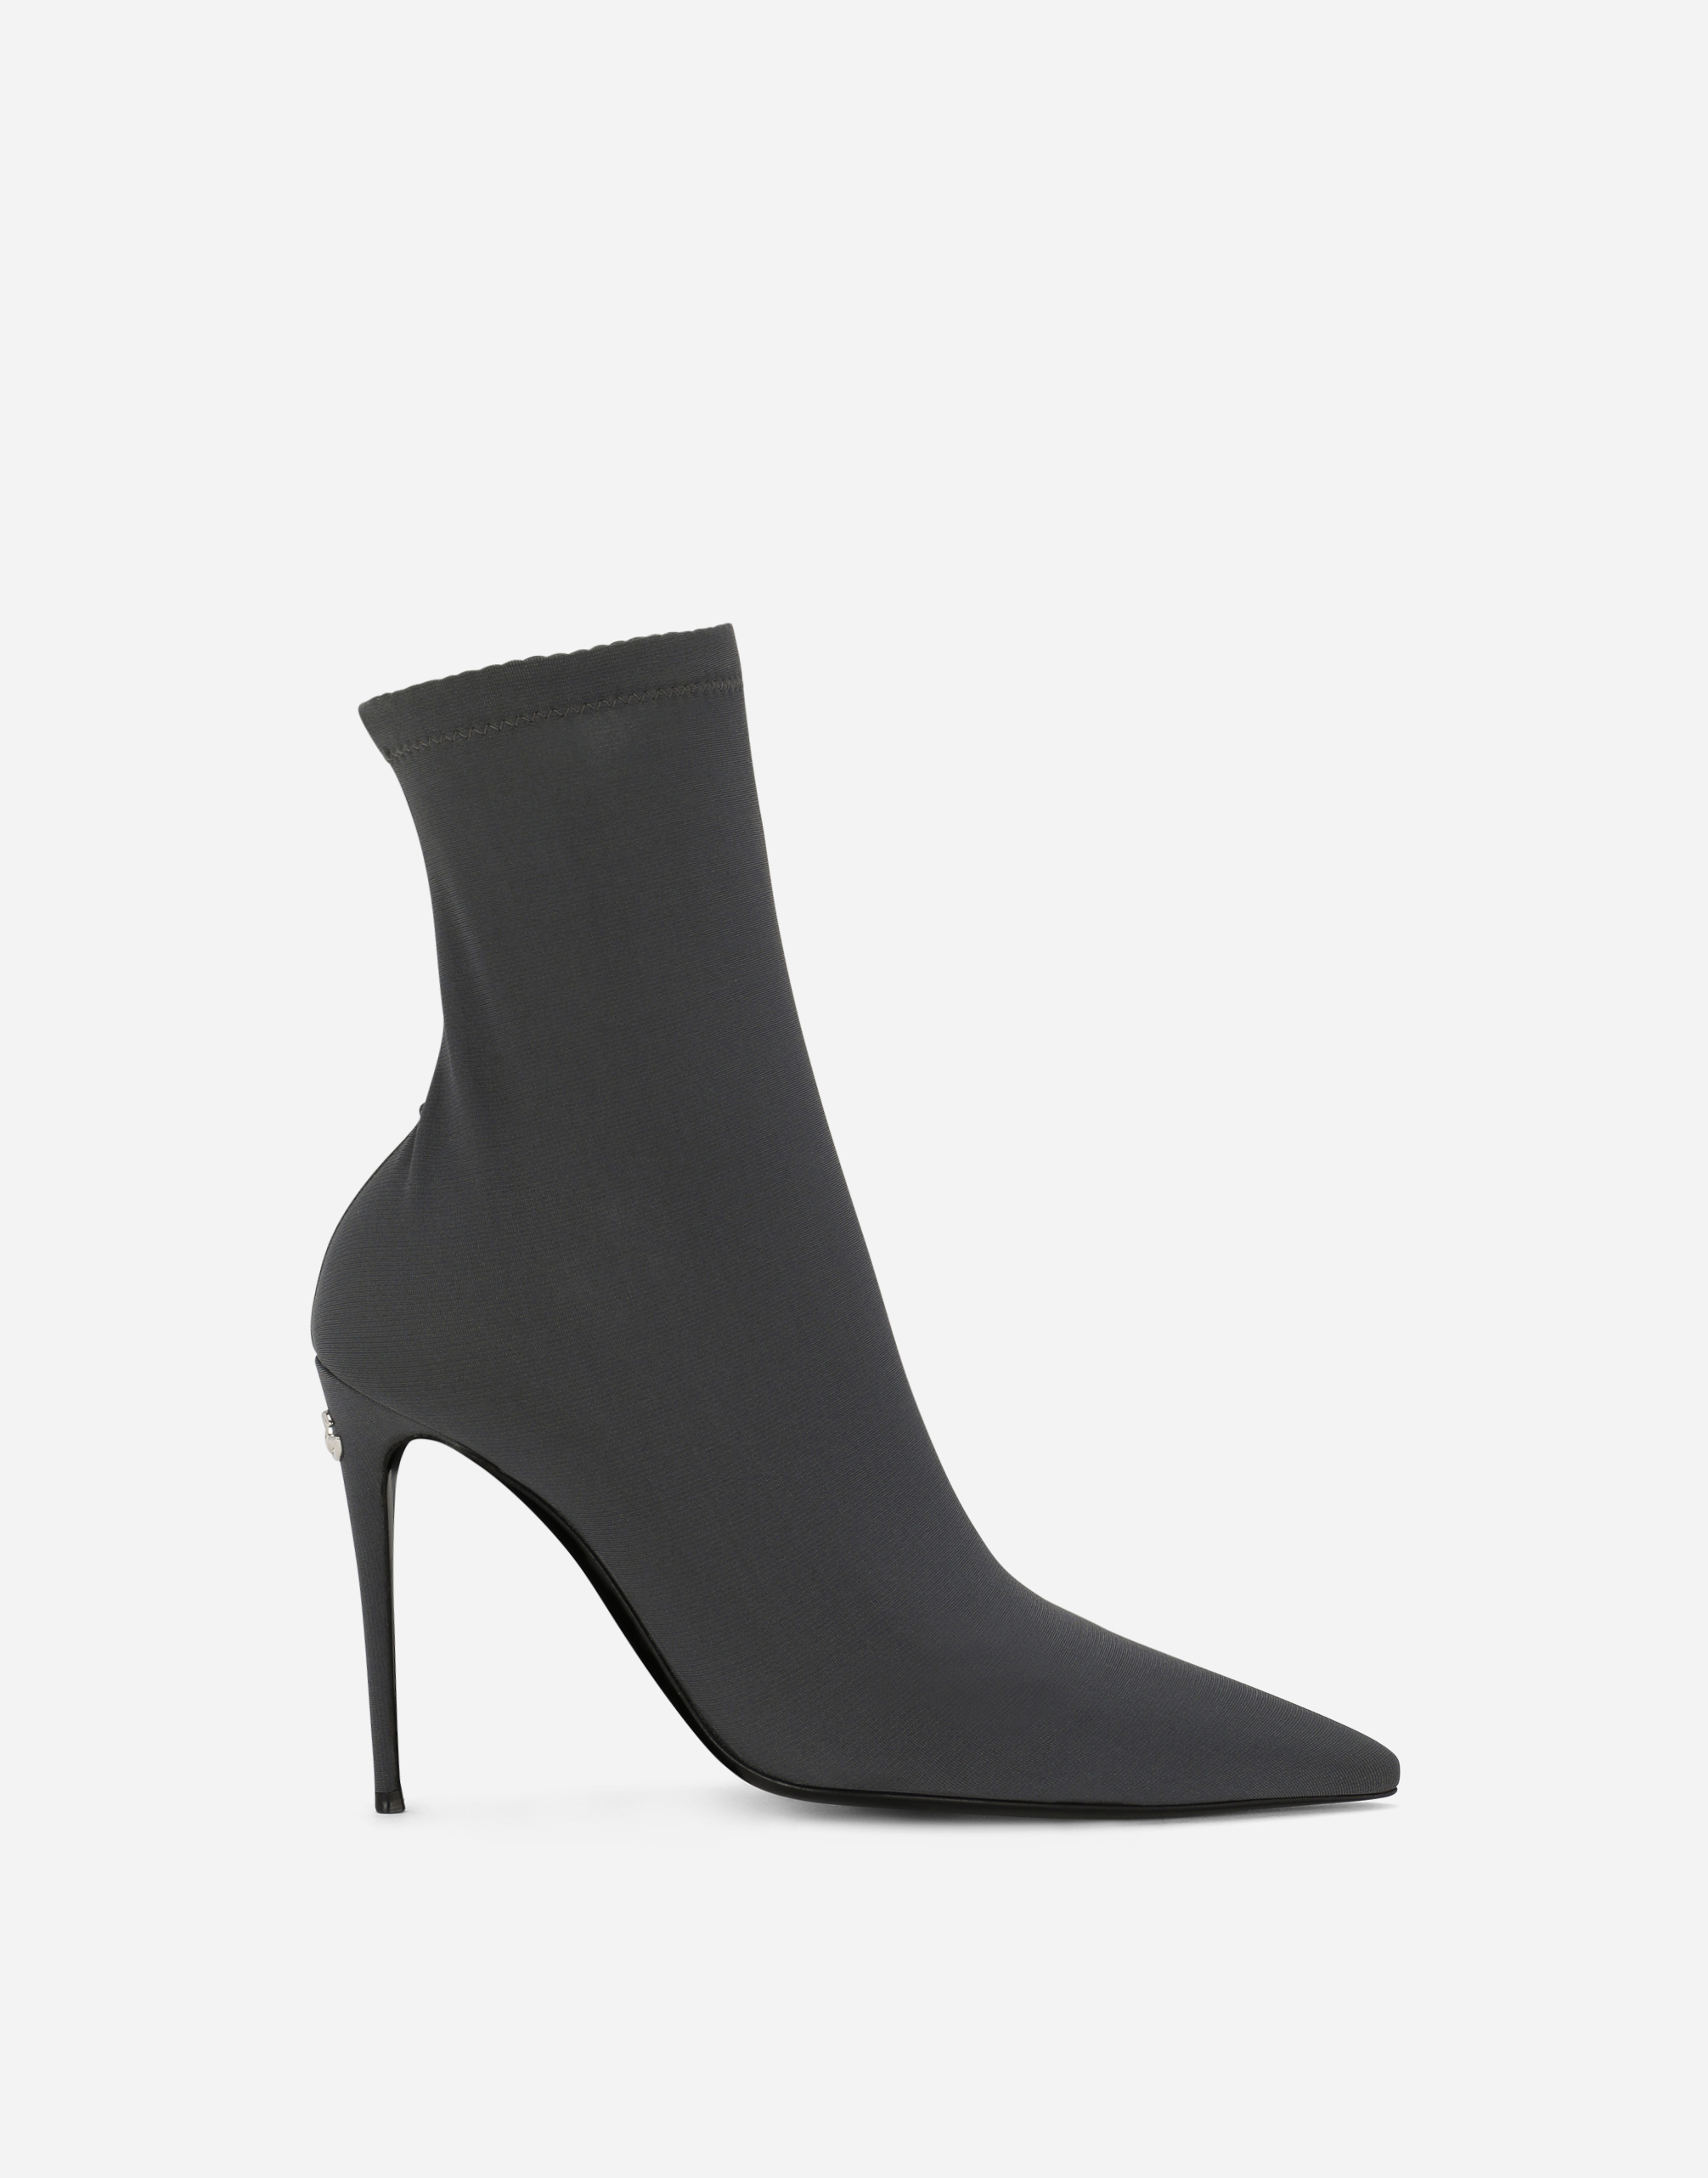 KIM DOLCE&GABBANA Stretch jersey ankle boots in Grey